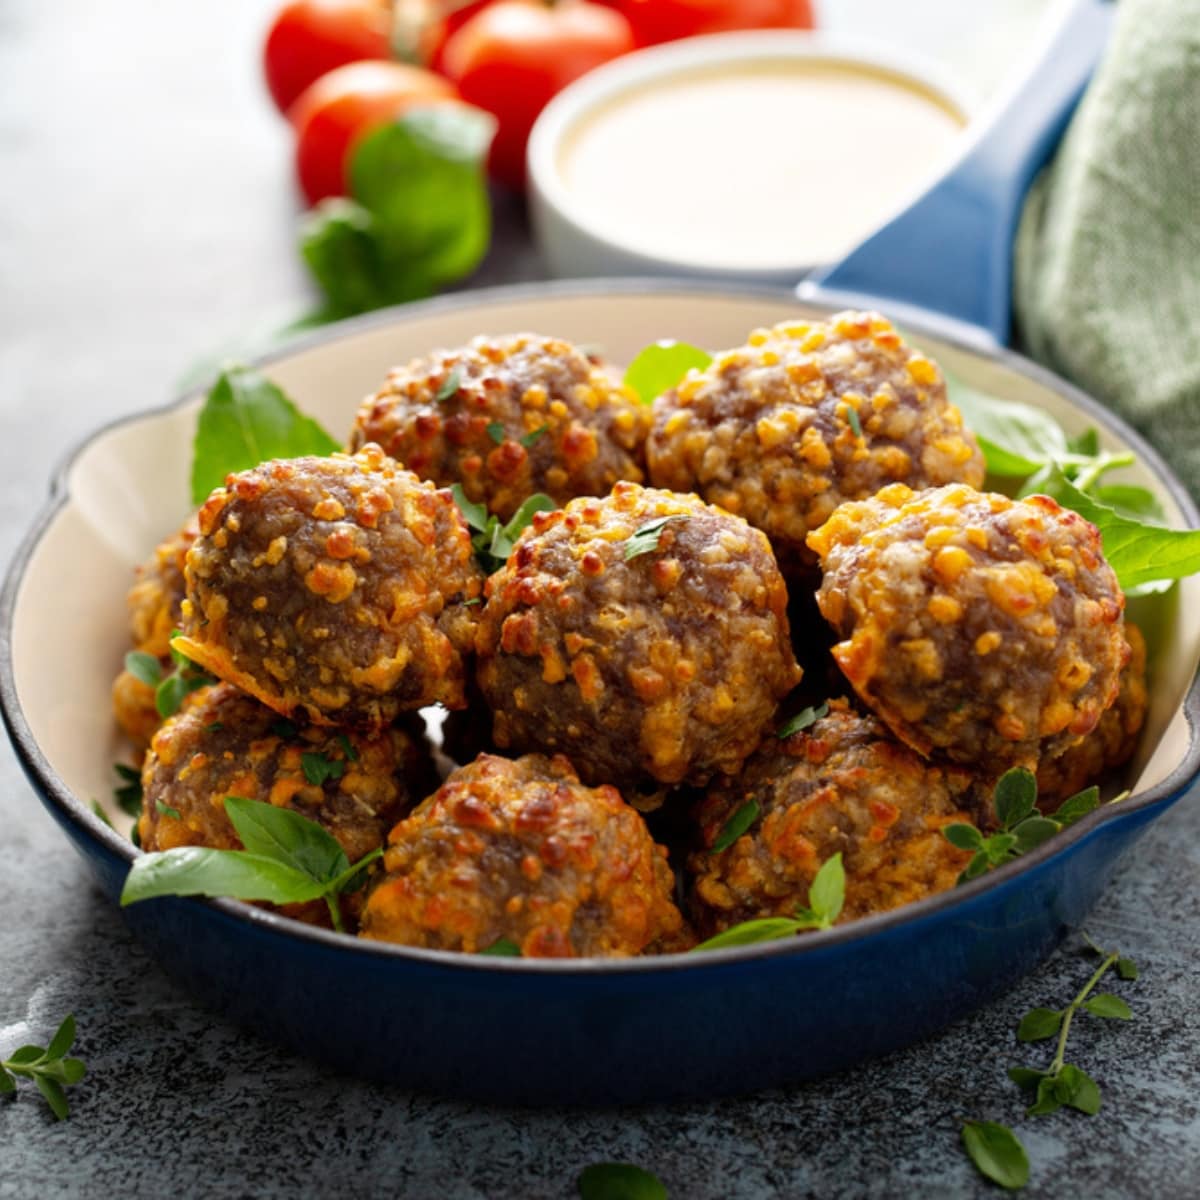 Cheesy Jimmy Dean Sausage Balls on a Skillet Garnished With Fresh Herbs